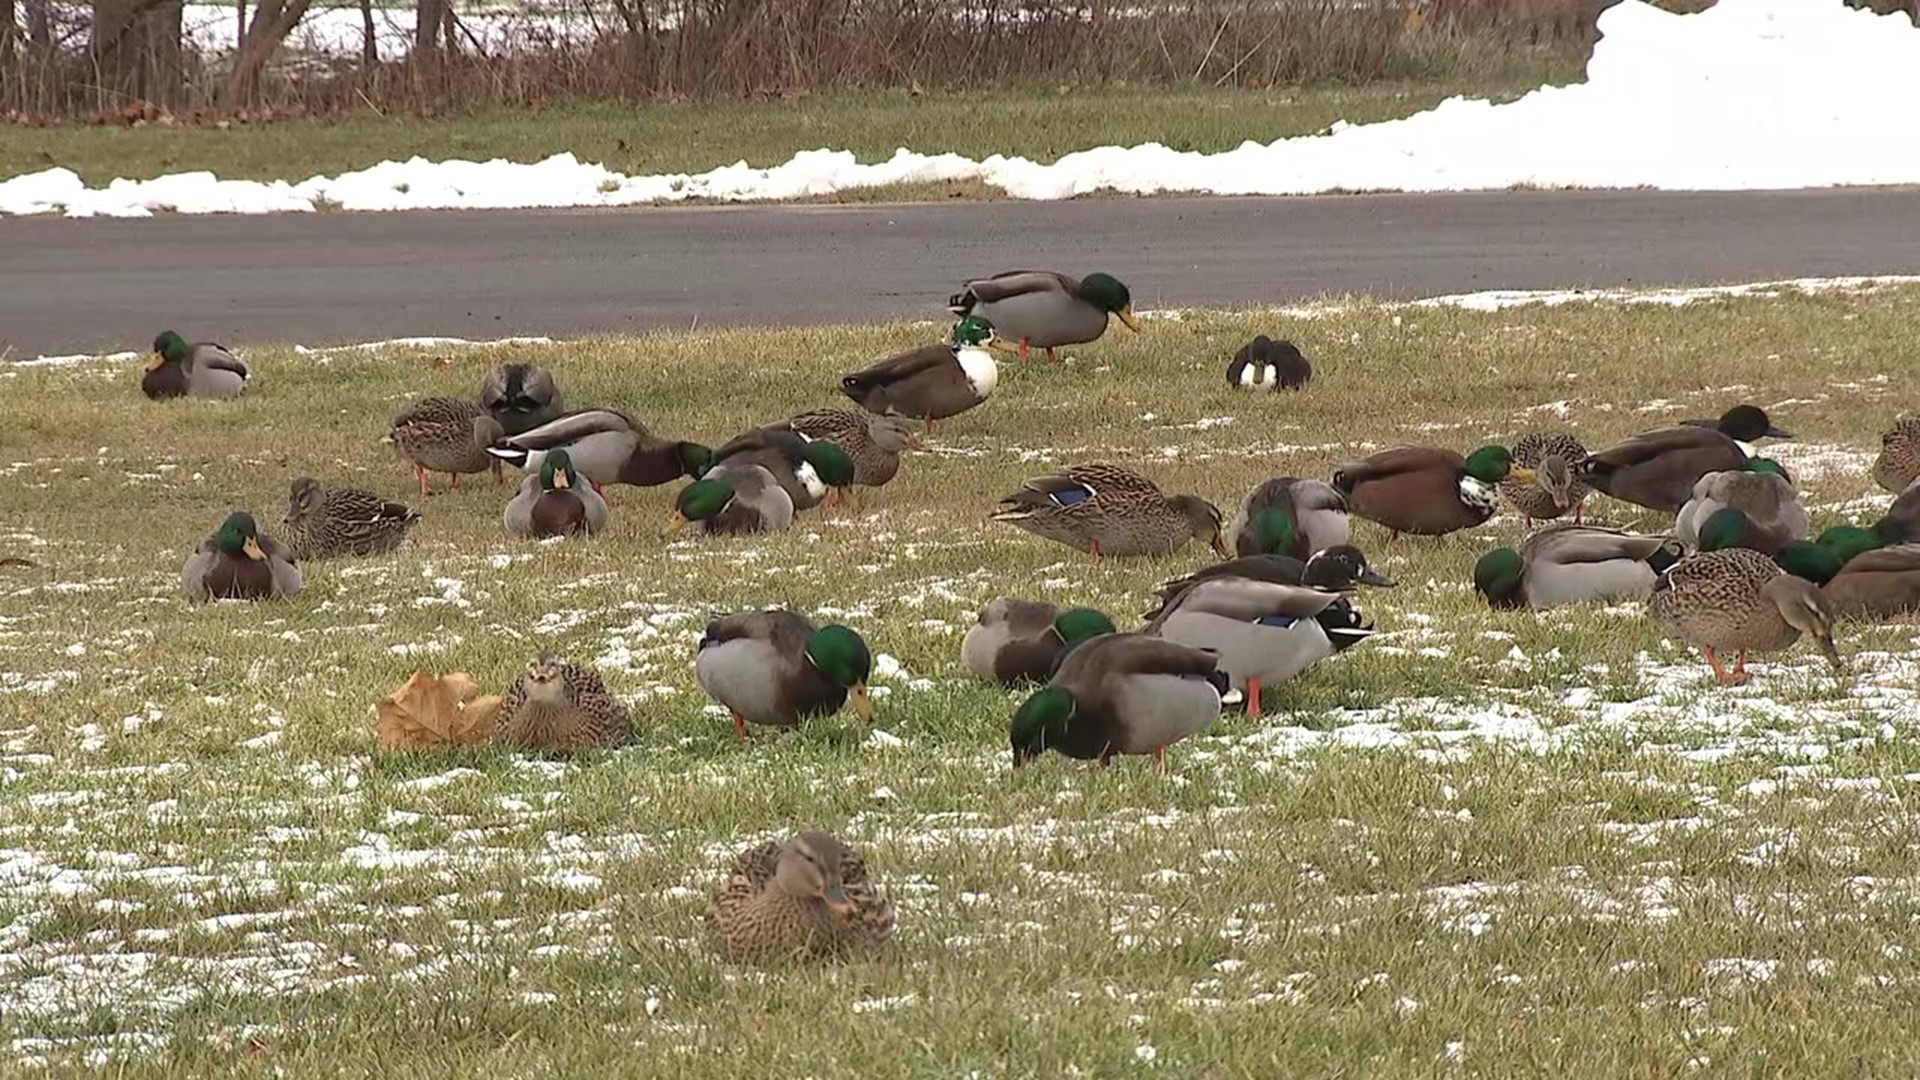 Supervisors in East Buffalo Township say people are illegally dumping their pet ducks. Newswatch 16's Nikki Krize explains the "fowl" play.